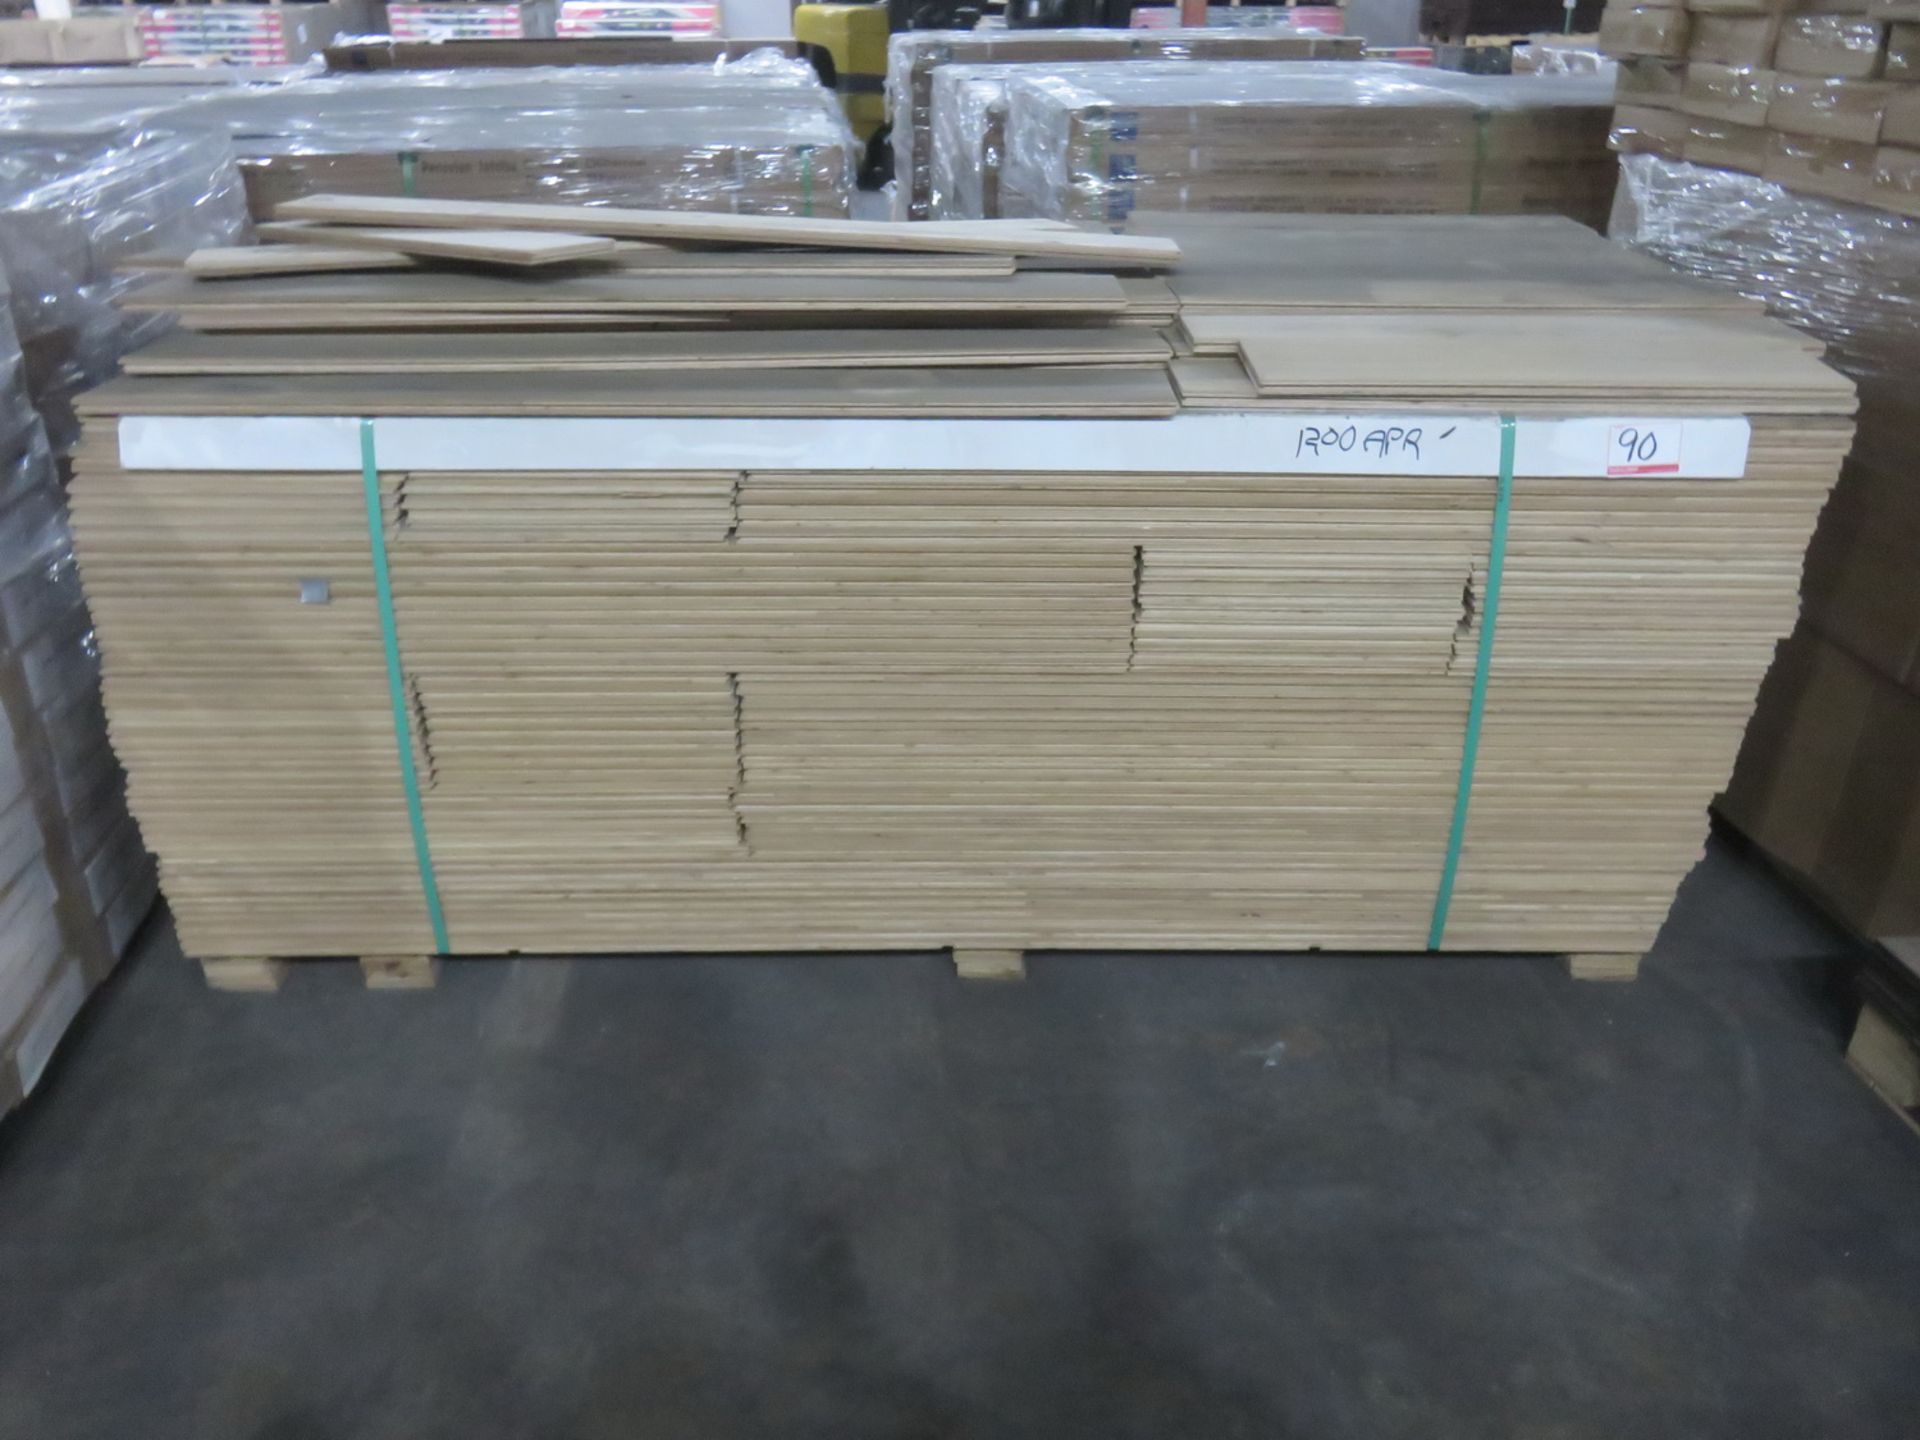 LOT - MAPLE UNSTAINED ENGINEERED HARDWOOD FLOORING (APPROX 1,200 SQFT) - Image 2 of 2